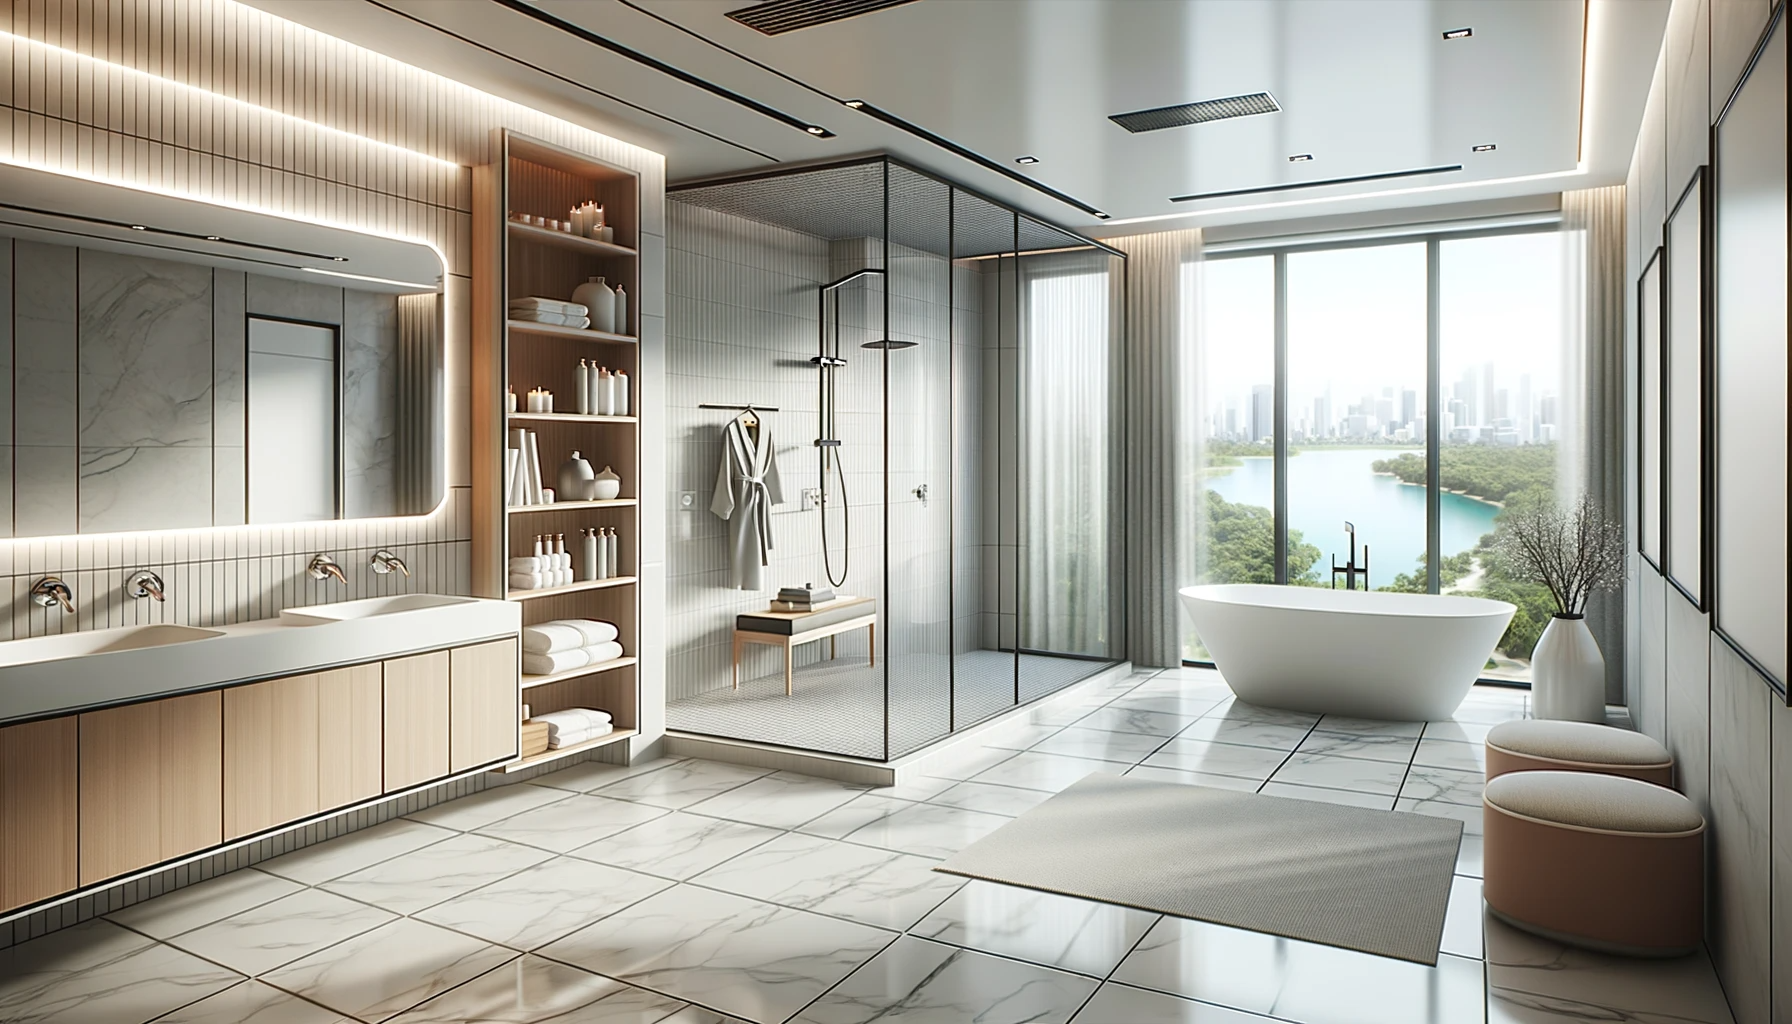 spacious modern bathroom with open shower area, freestanding tub, and just a few sleek storage options.